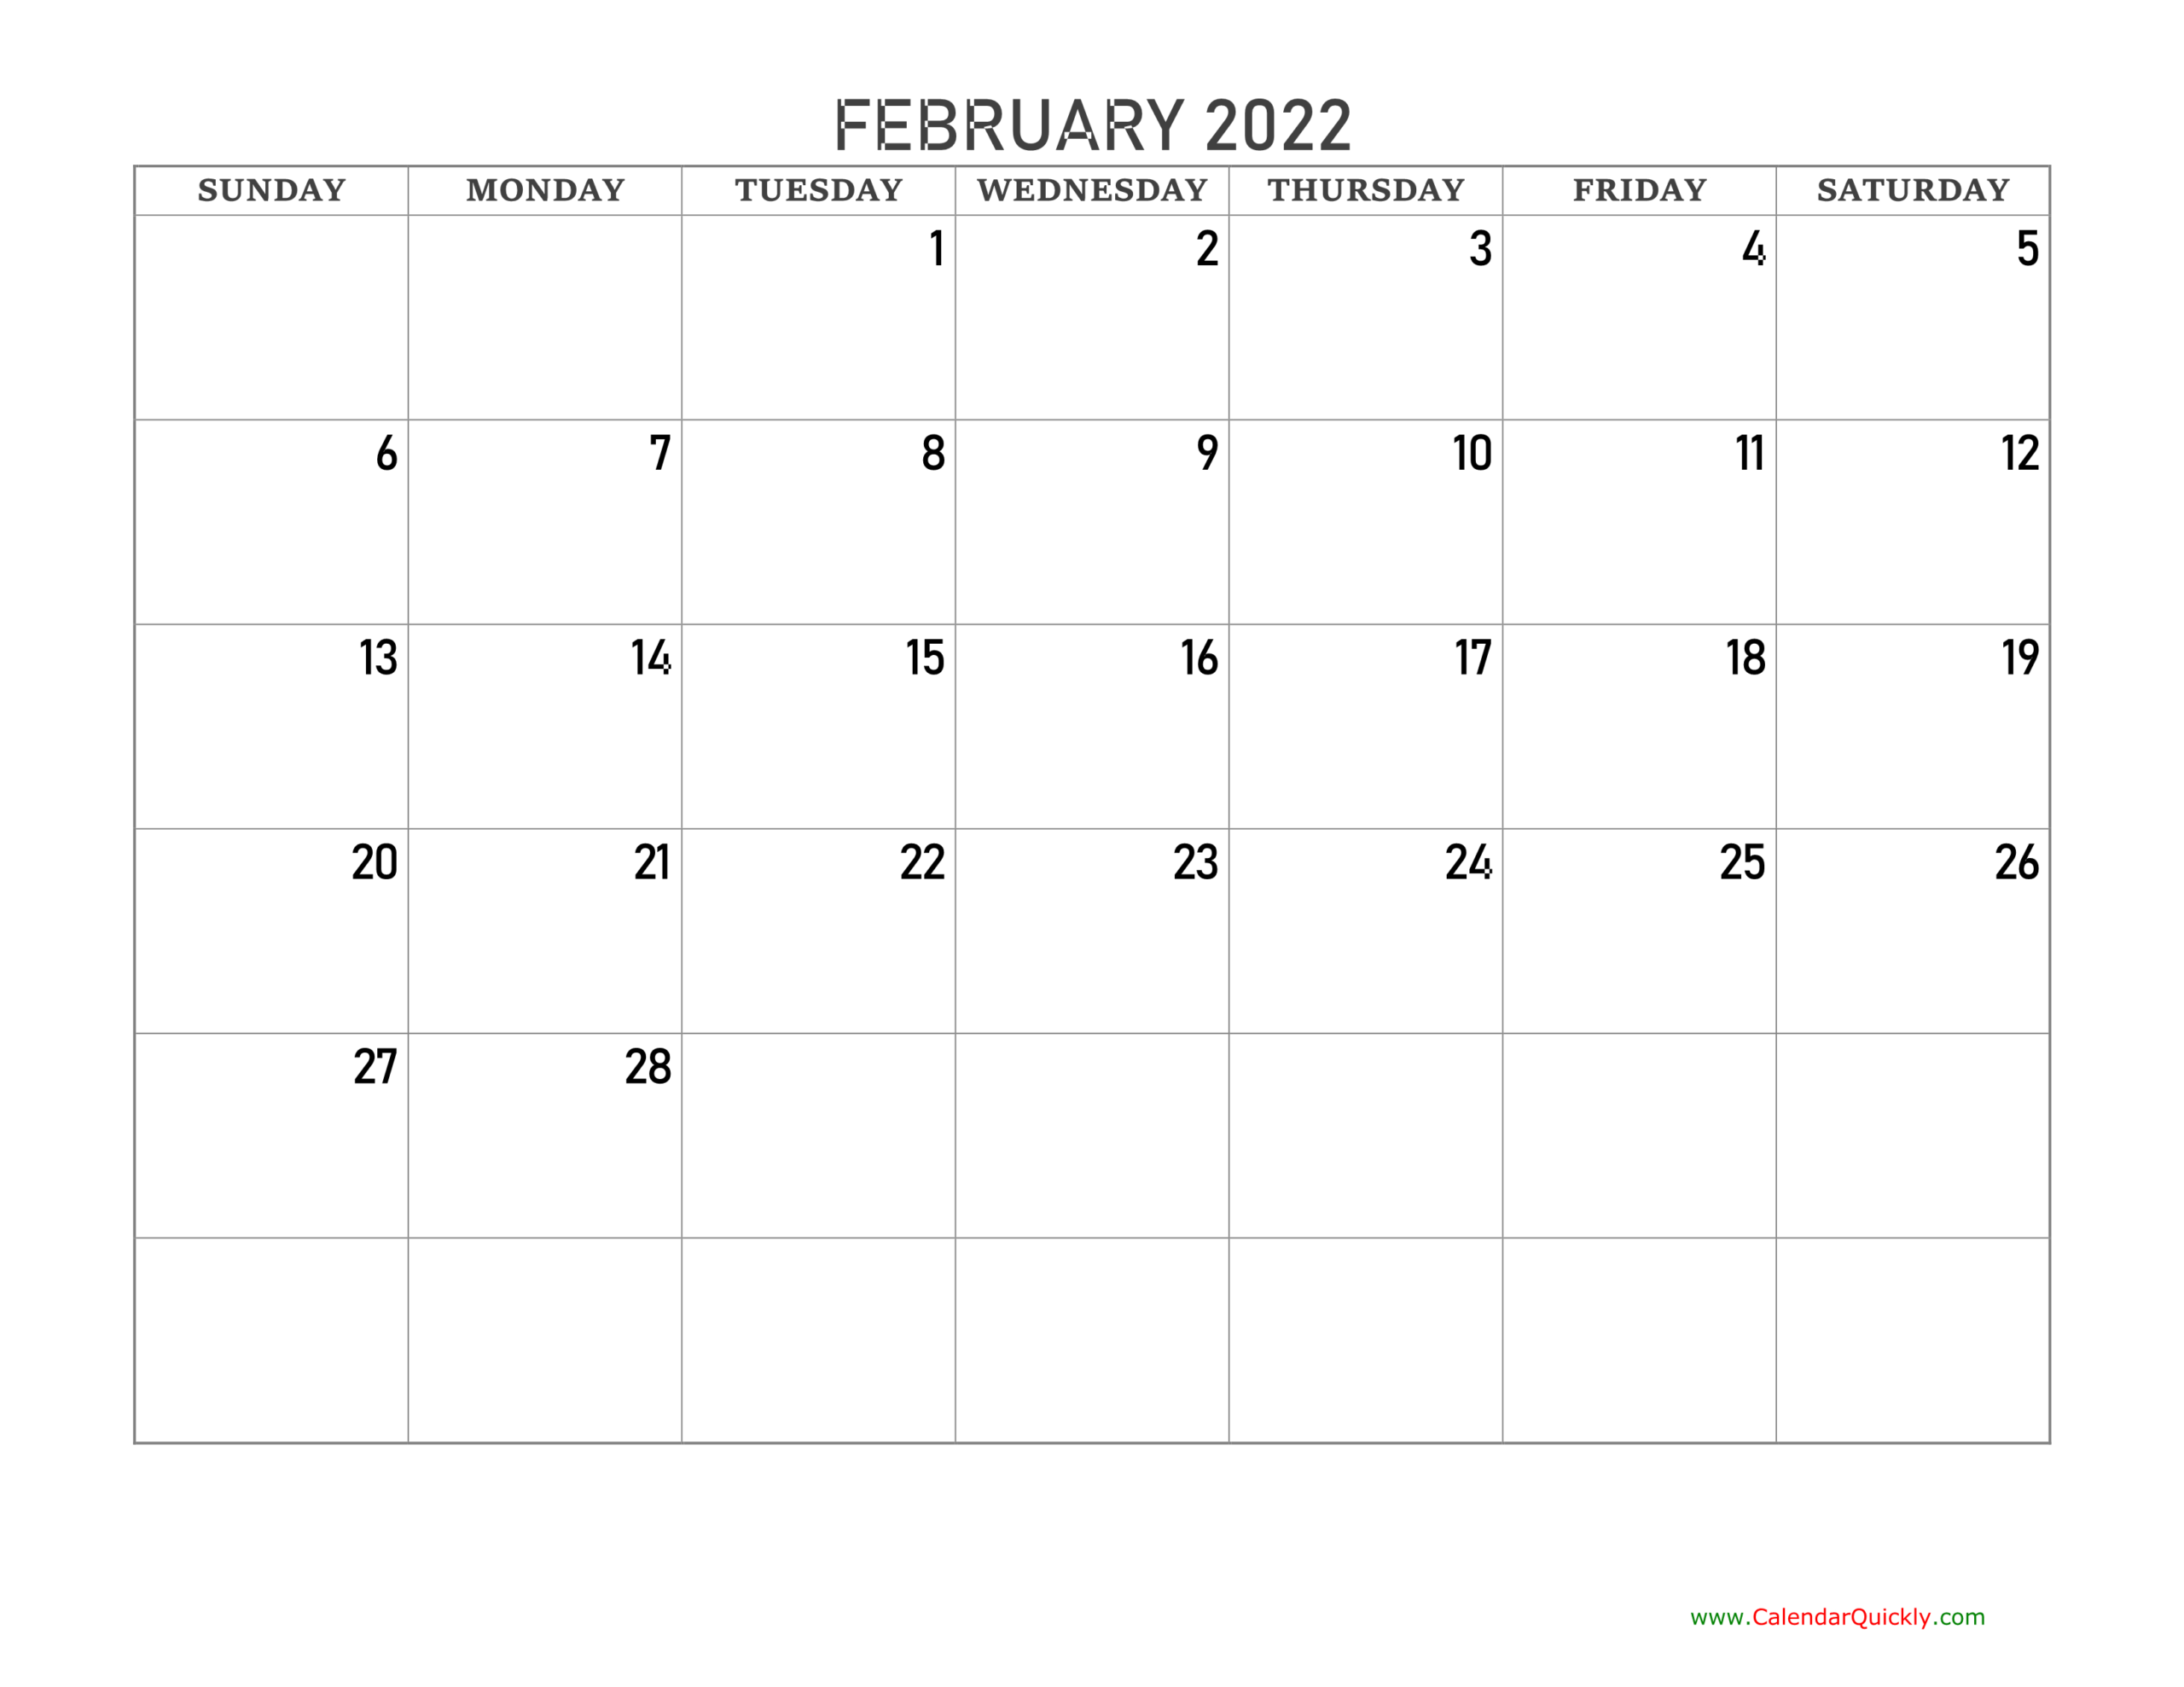 February 2022 Blank Calendar | Calendar Quickly  Free Printable Calendar 2022 Without Download